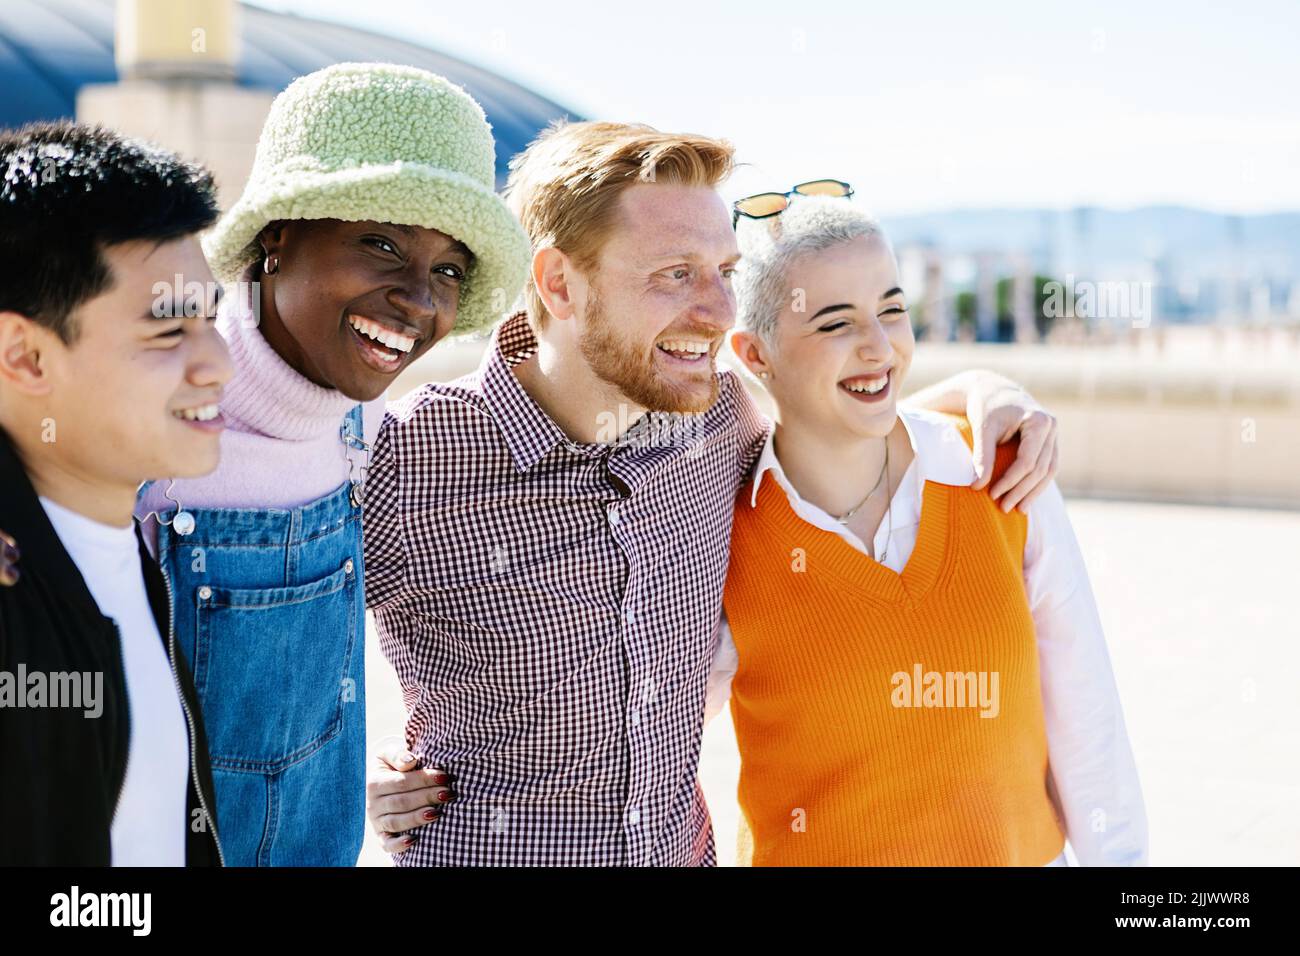 Multiracial group of young people hugging and embracing together outdoor Stock Photo